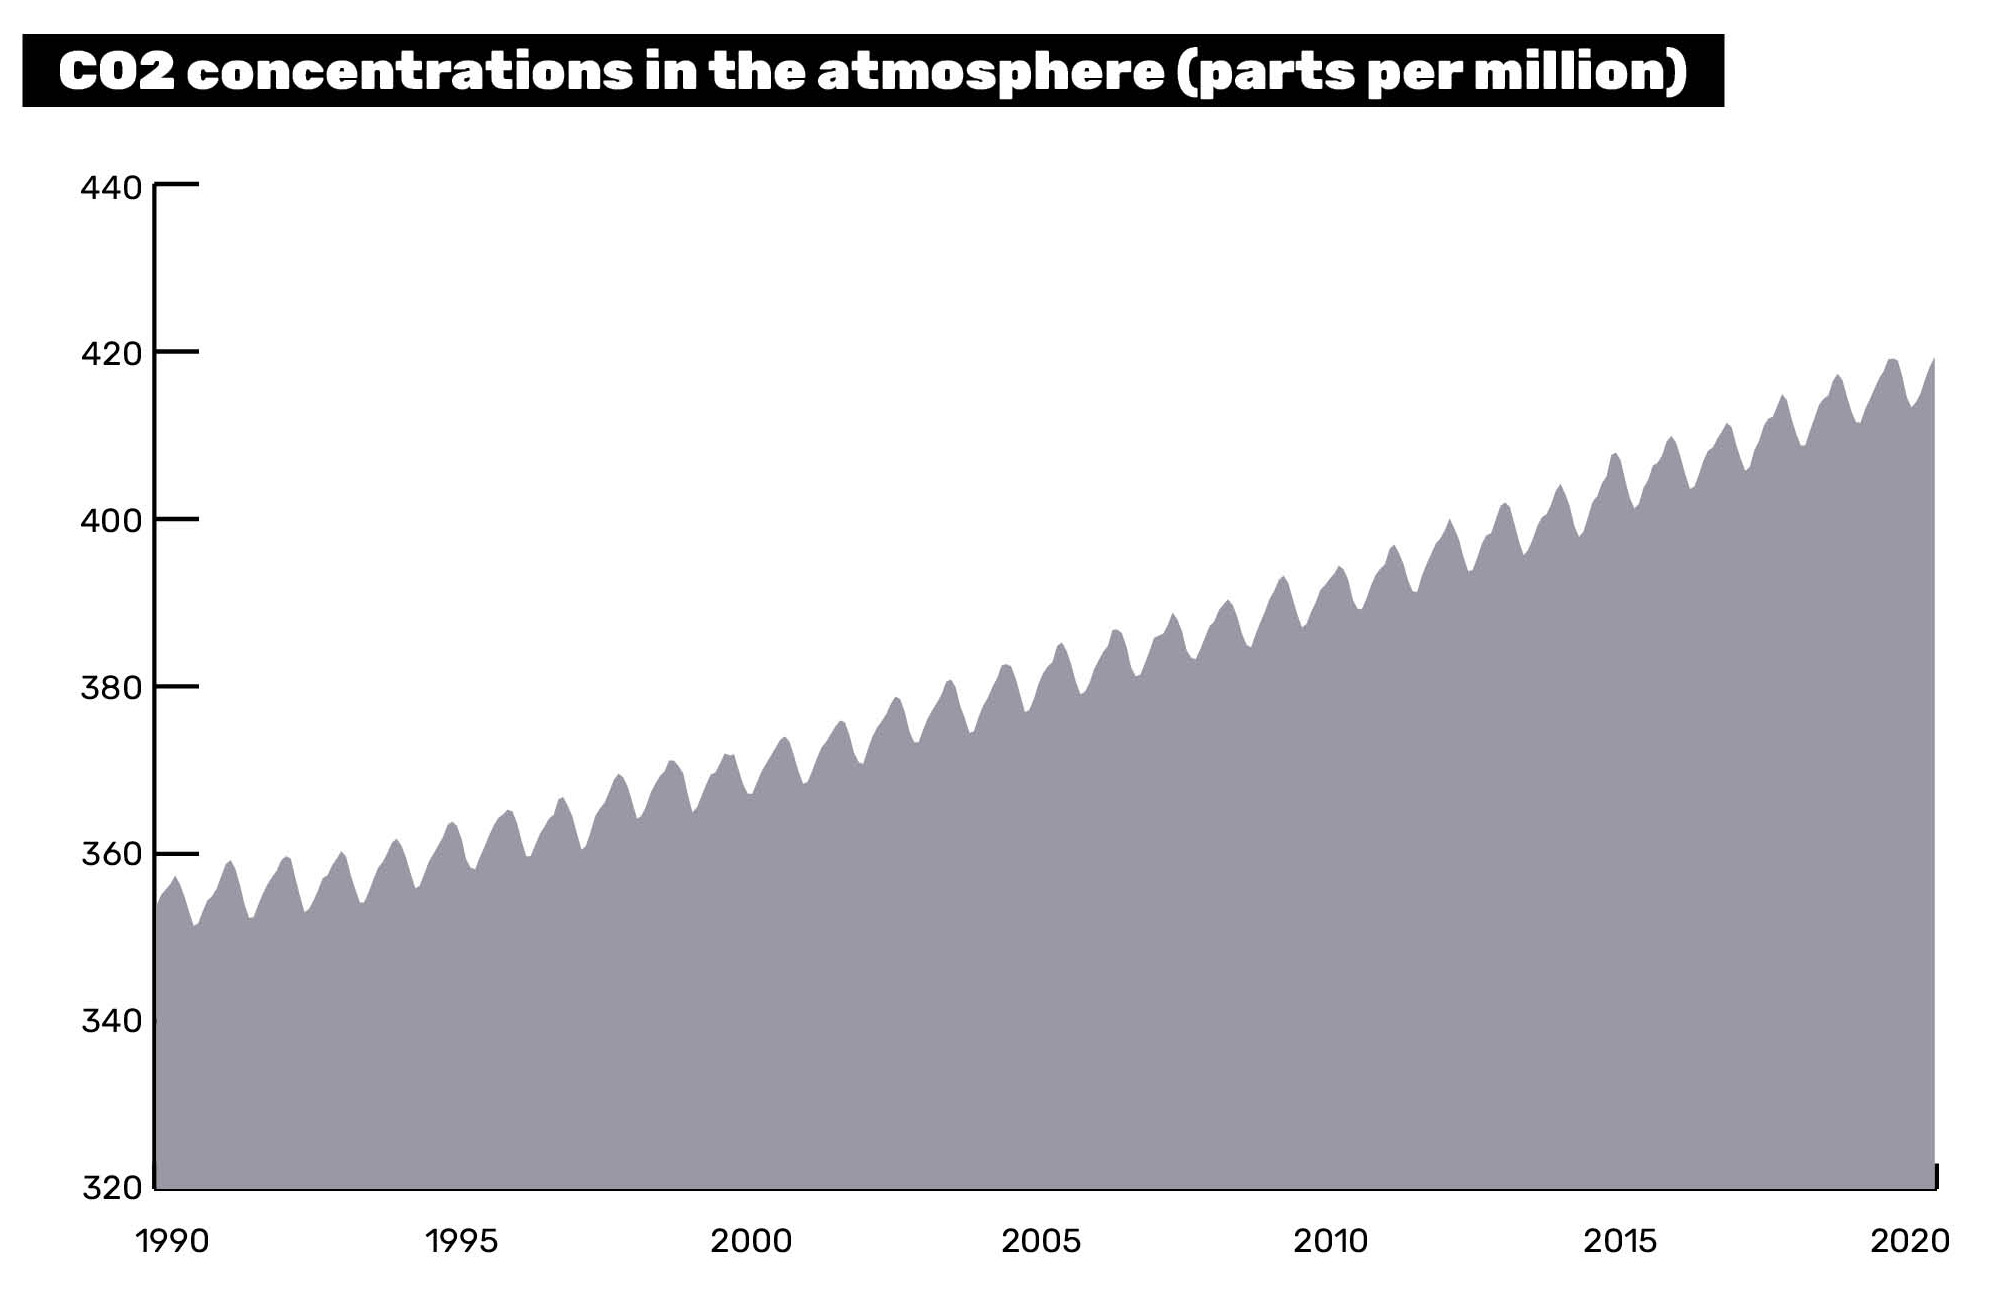 Graph showing CO2 concentrations in the atmosphere from 1990 to 2020